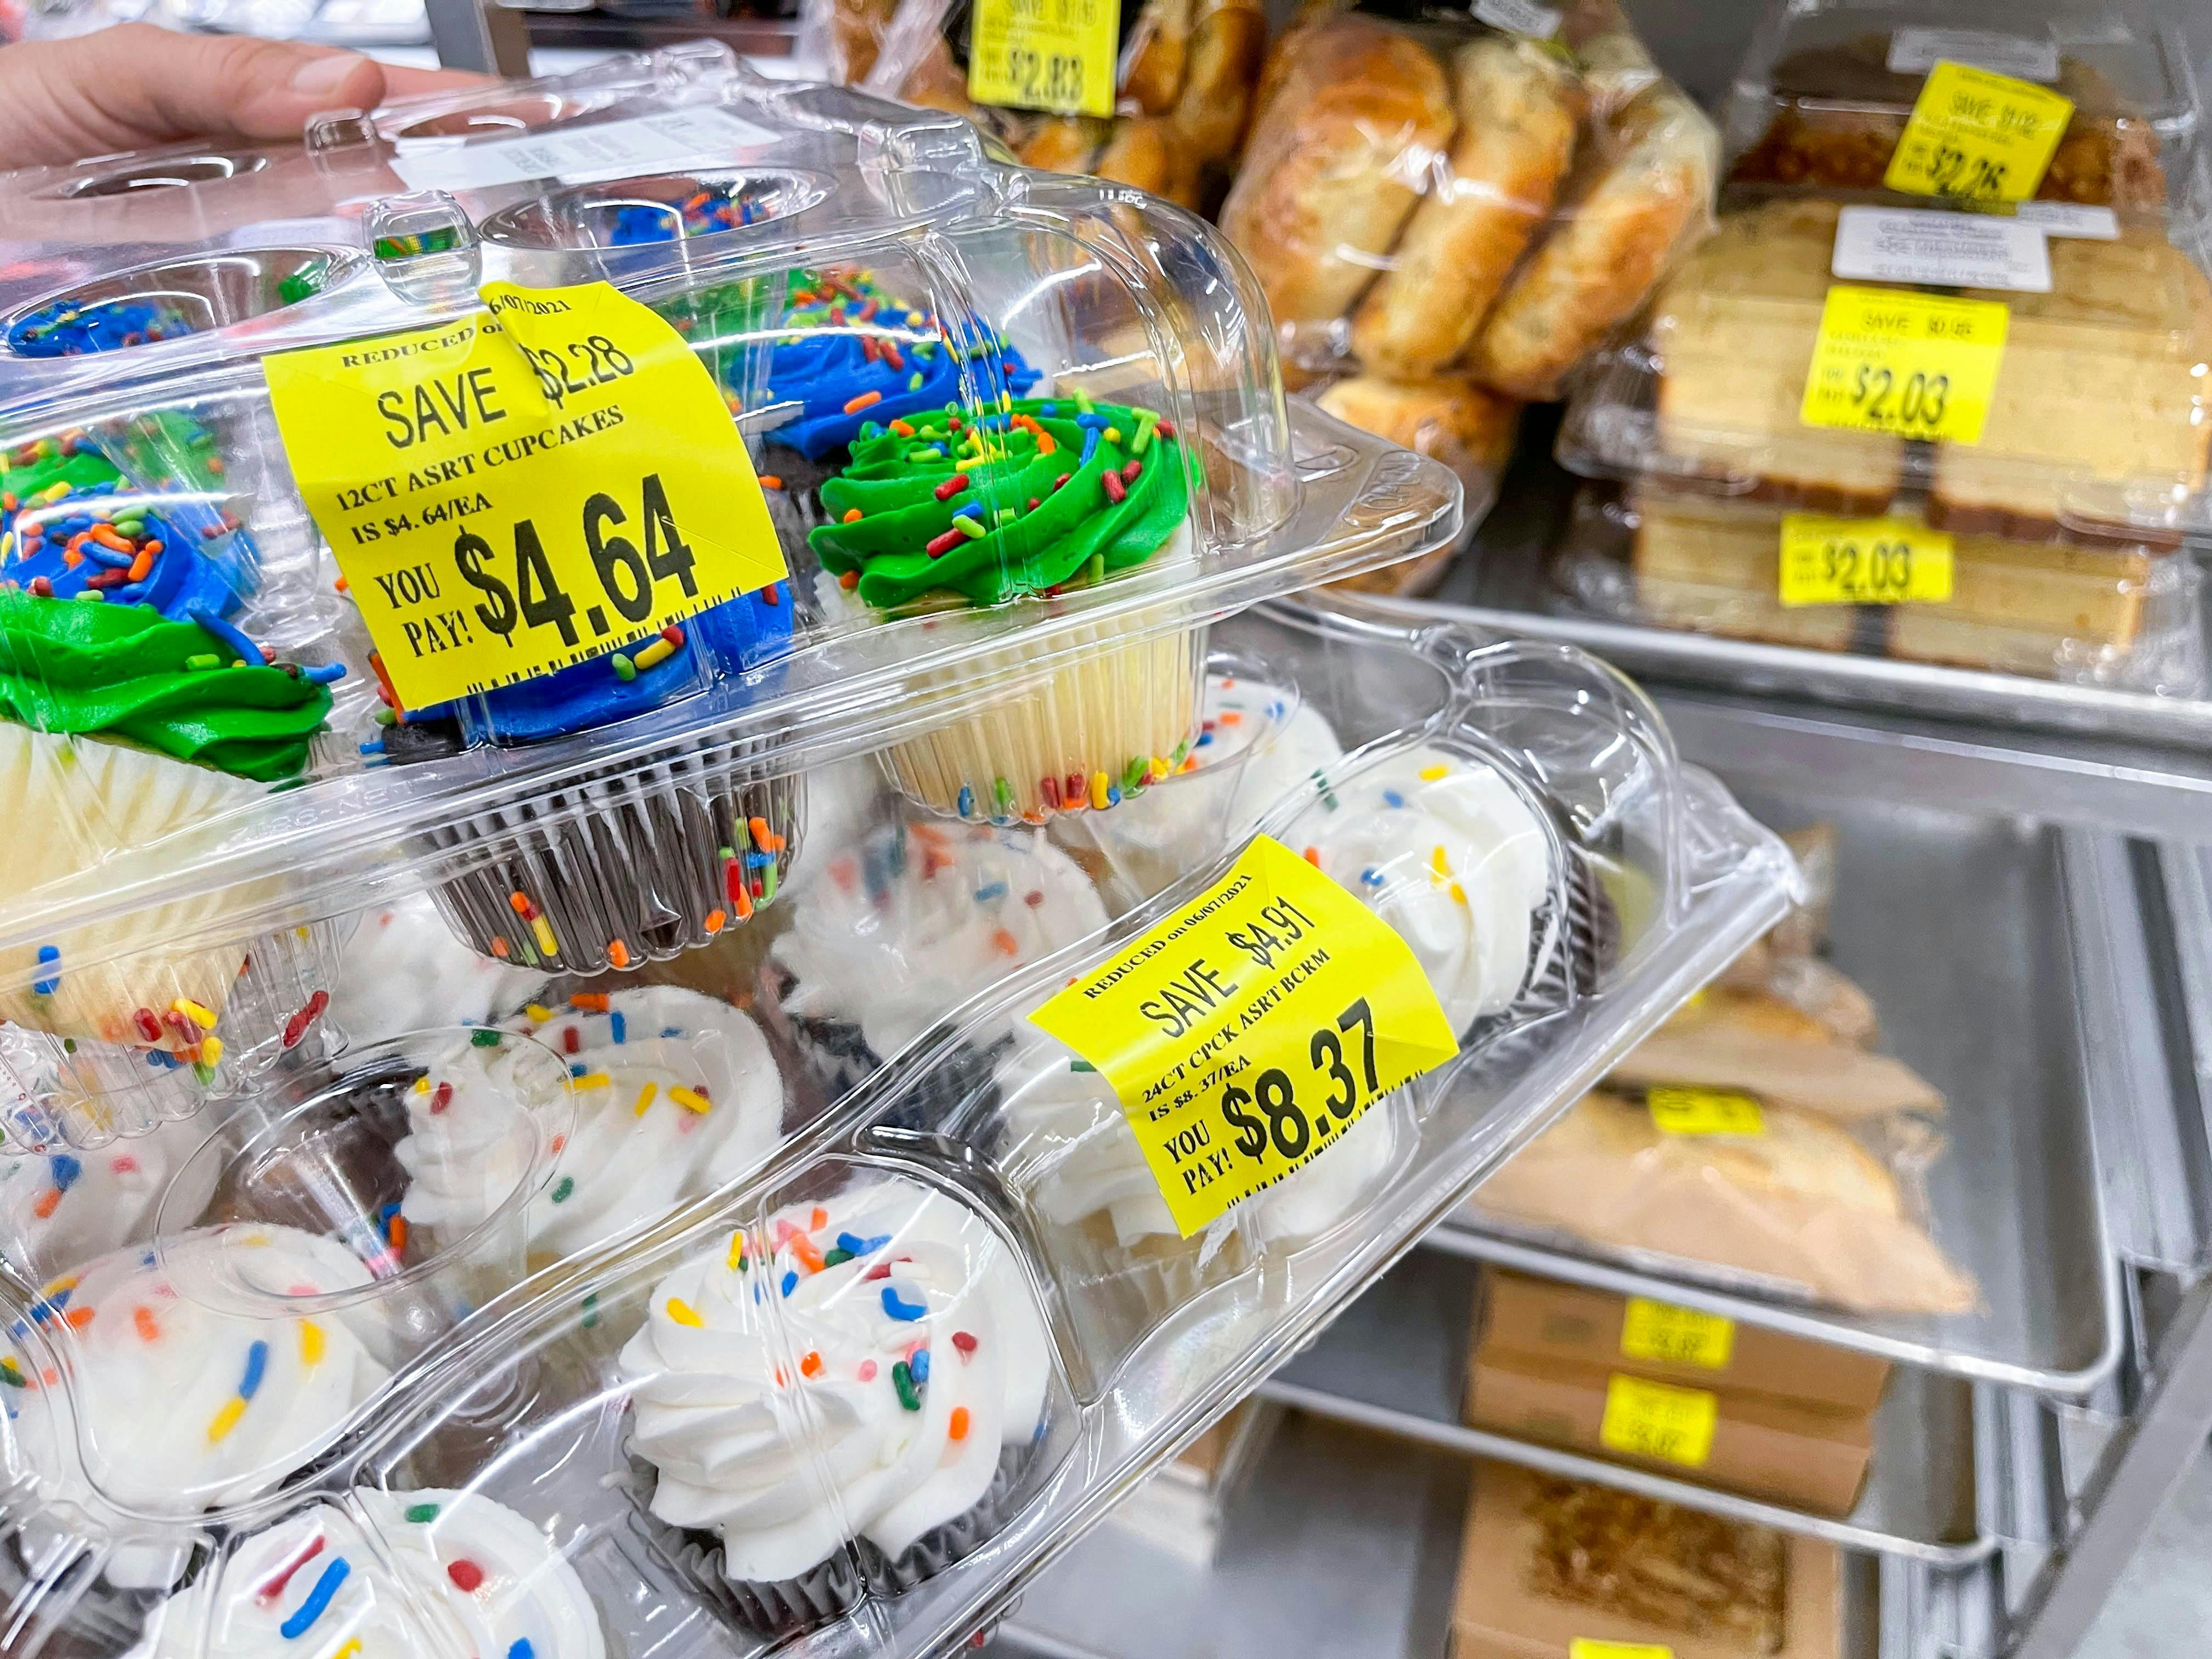 Alleged Ex-Walmart Employee Claims Sheet Cakes Are Frozen